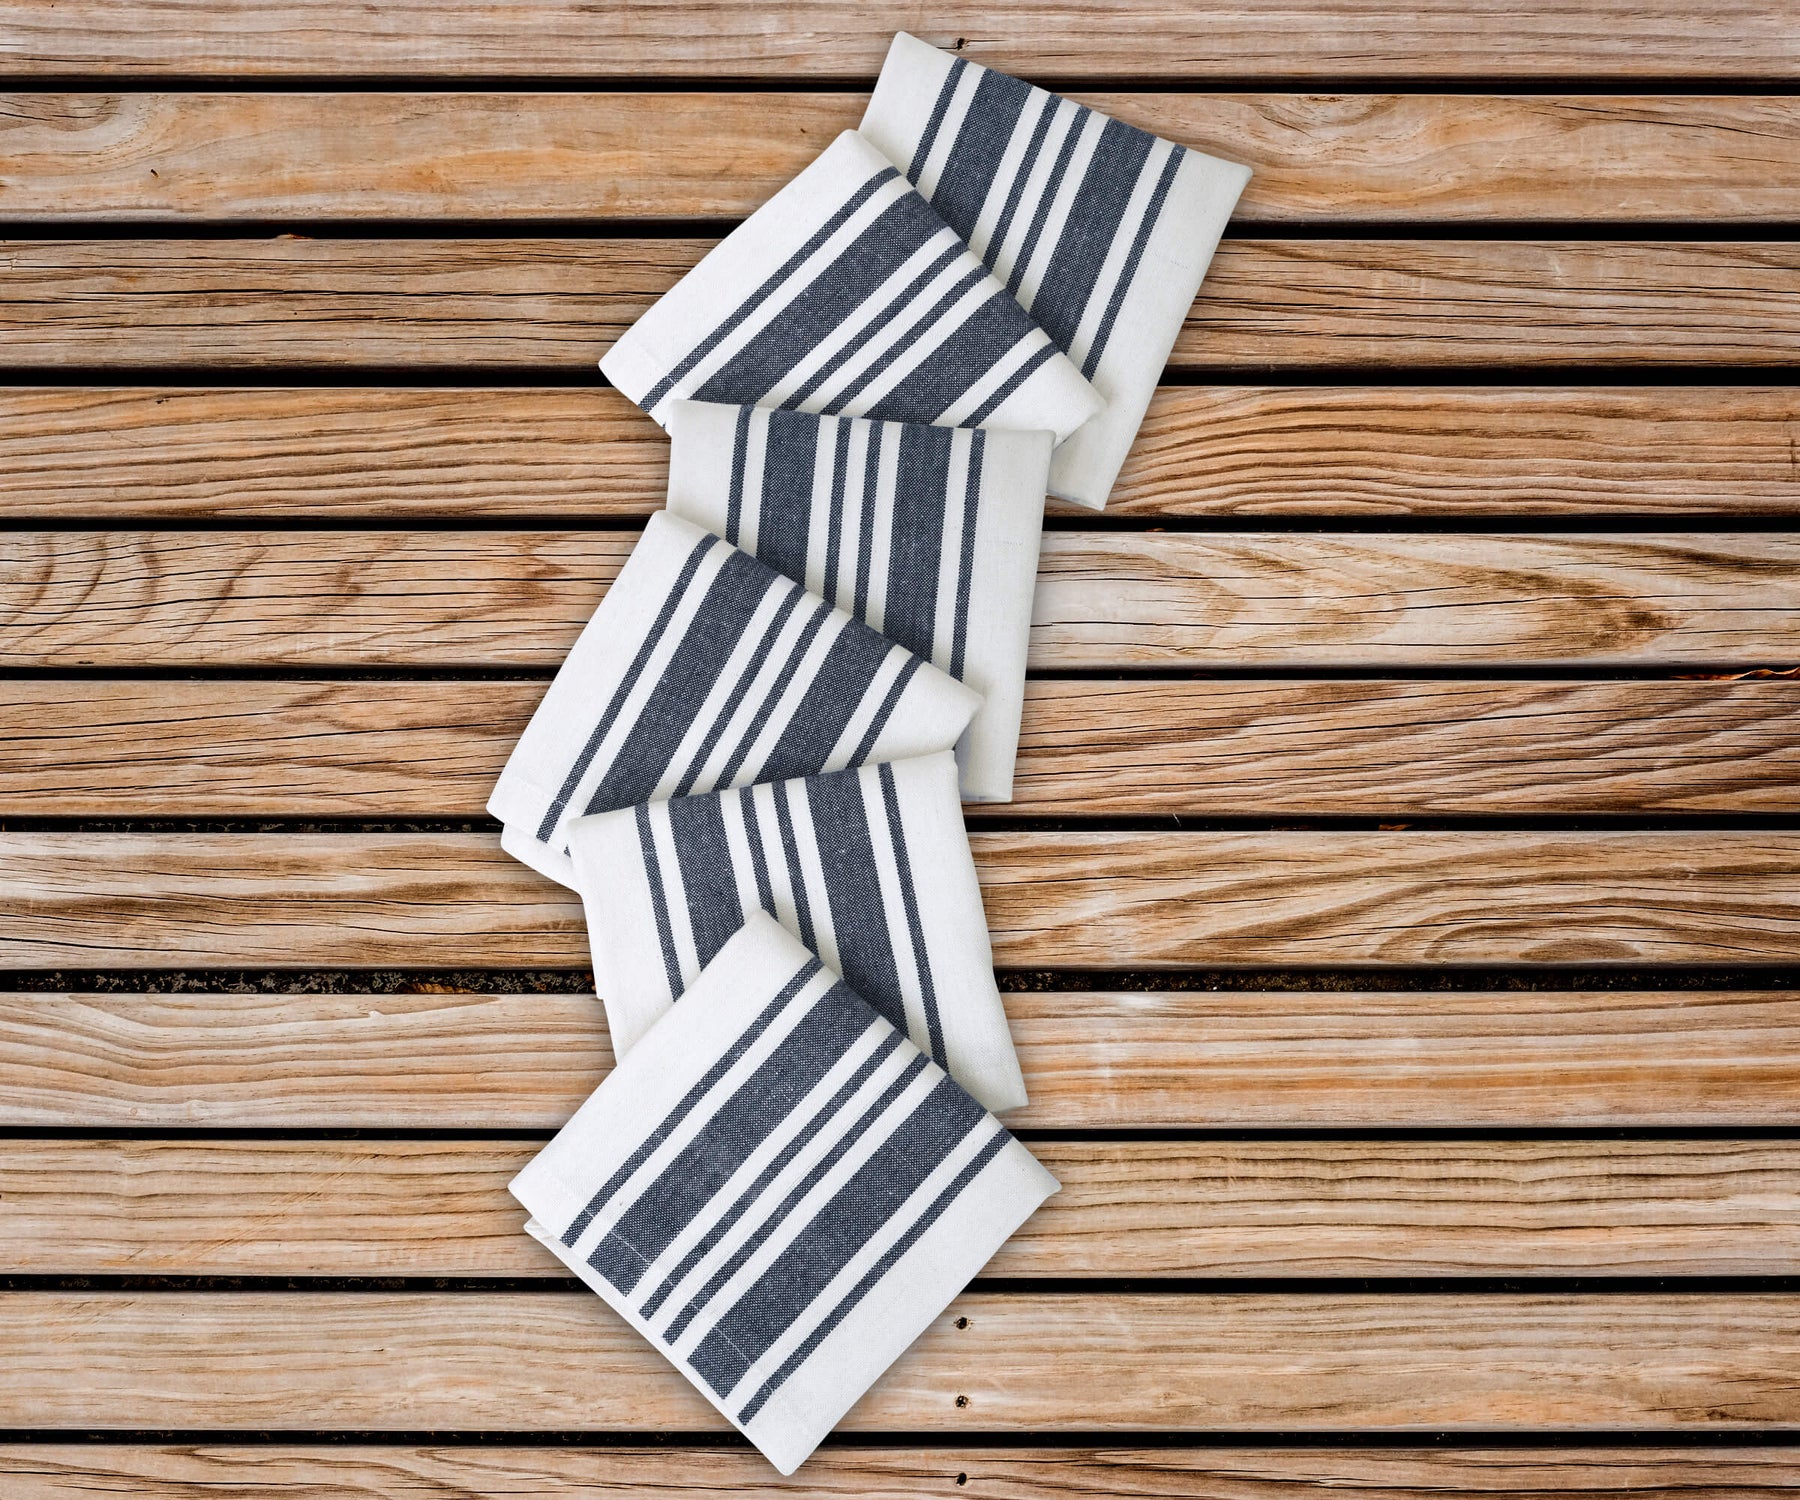 Cotton napkins as blue napkins cloth - Bistro Napkins with blue stripe features navy blue cloth napkins are arranged in the zig zag pattern on the table.